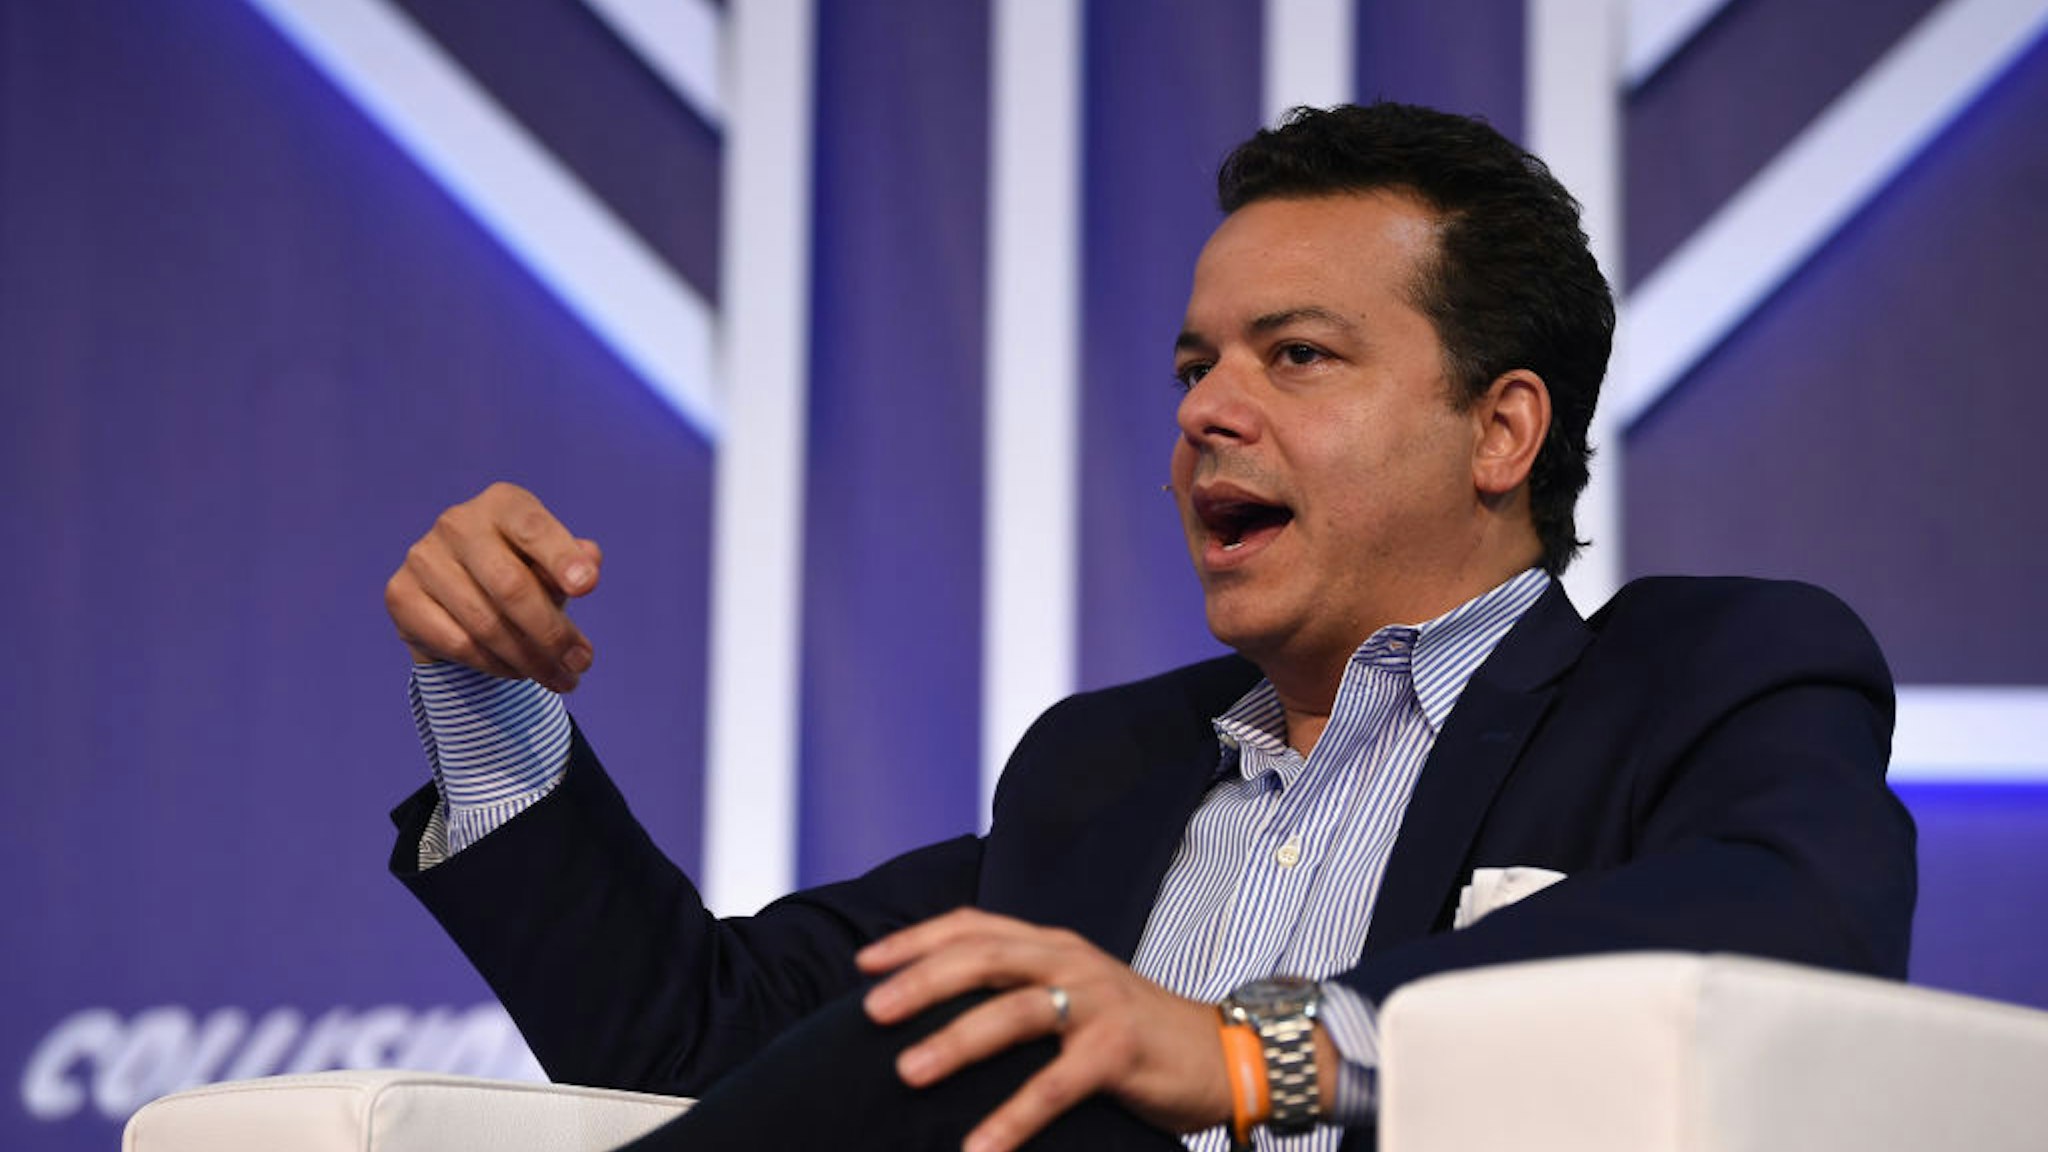 Louisiana , United States - 2 May 2018; John Avlon, The Daily Beast on the Panda Conf/Creatiff stage during day two of Collision 2018 at Ernest N. Morial Convention Center in New Orleans. (Photo By Diarmuid Greene/Sportsfile via Getty Images)